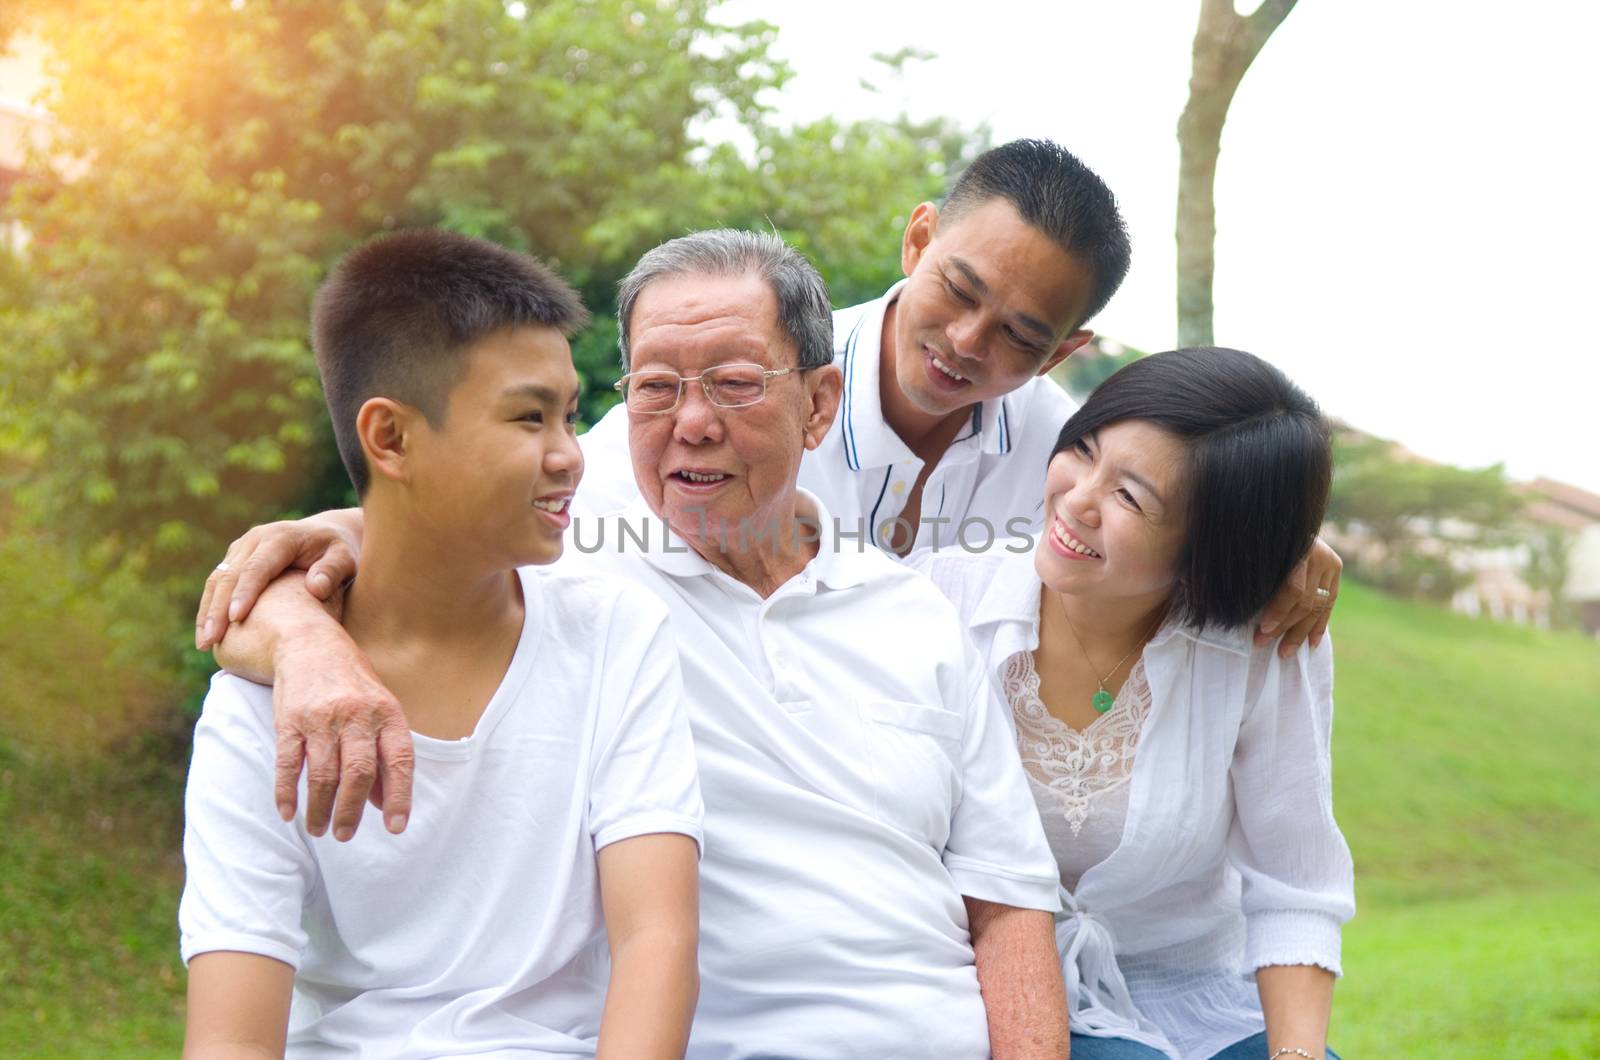 Portrait Of Multi-Generation Chinese Family Relaxing In Park 